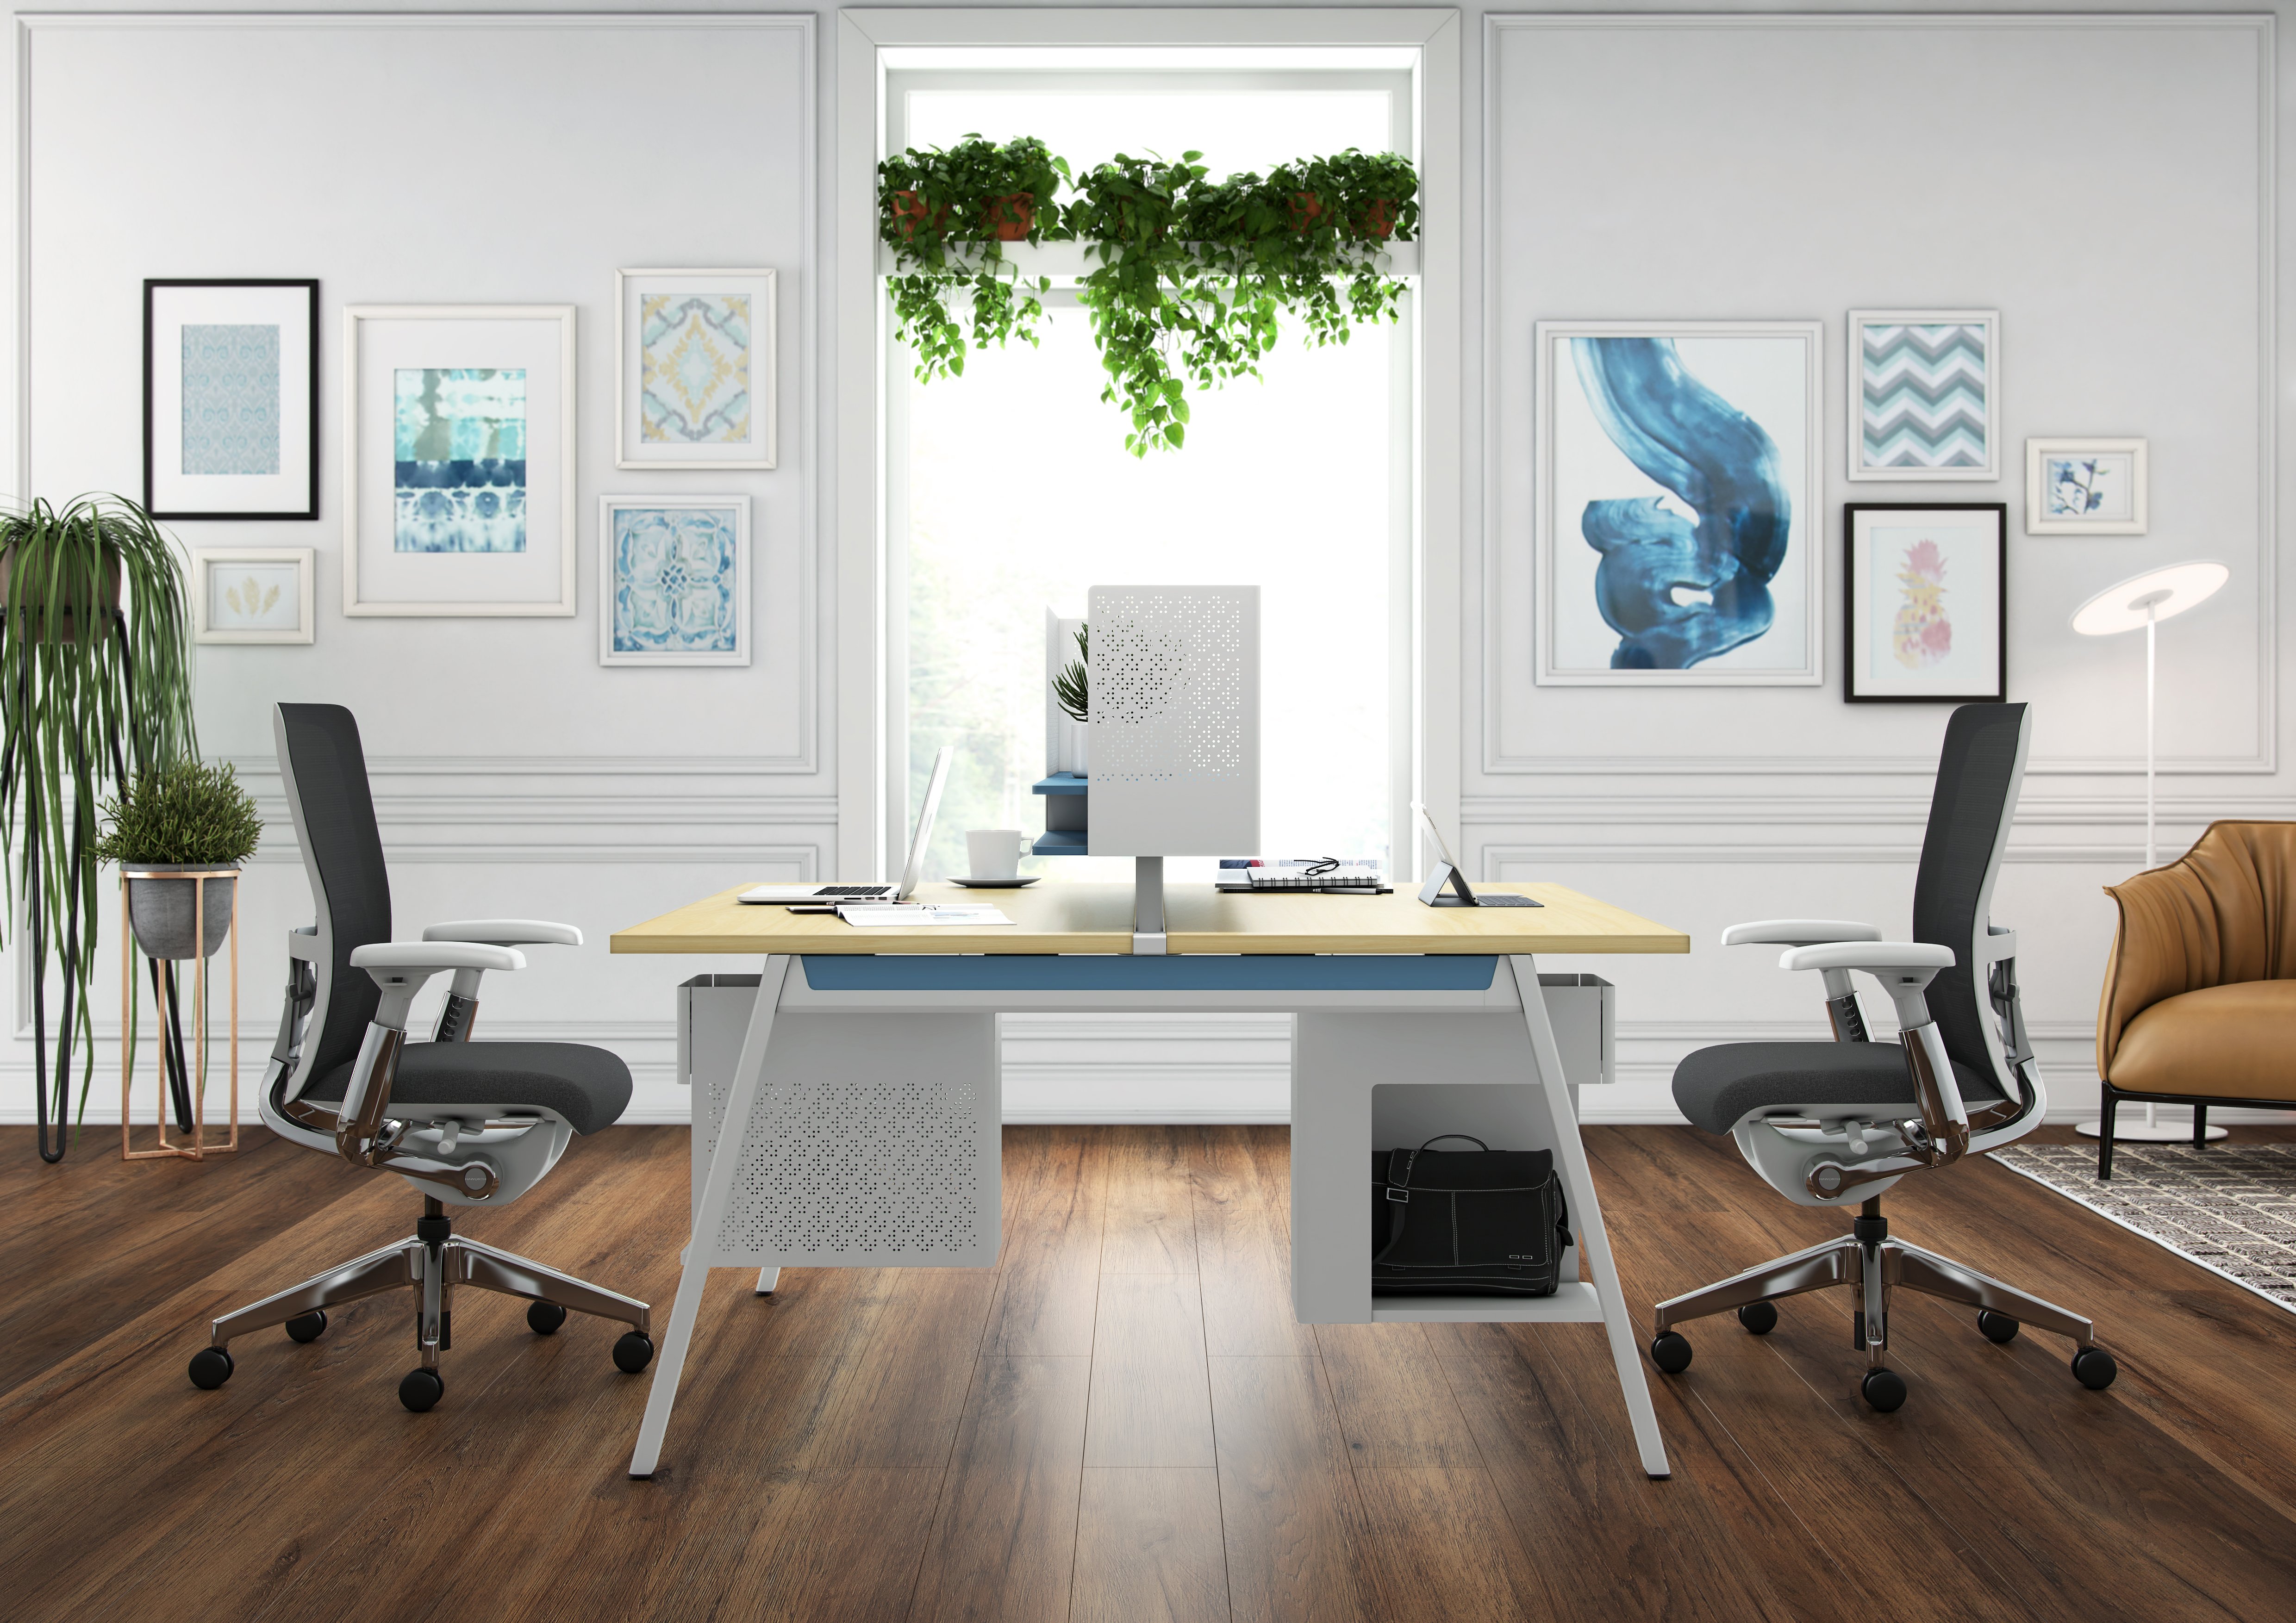 Active Components in home office with two individual workspaces and under desk storage